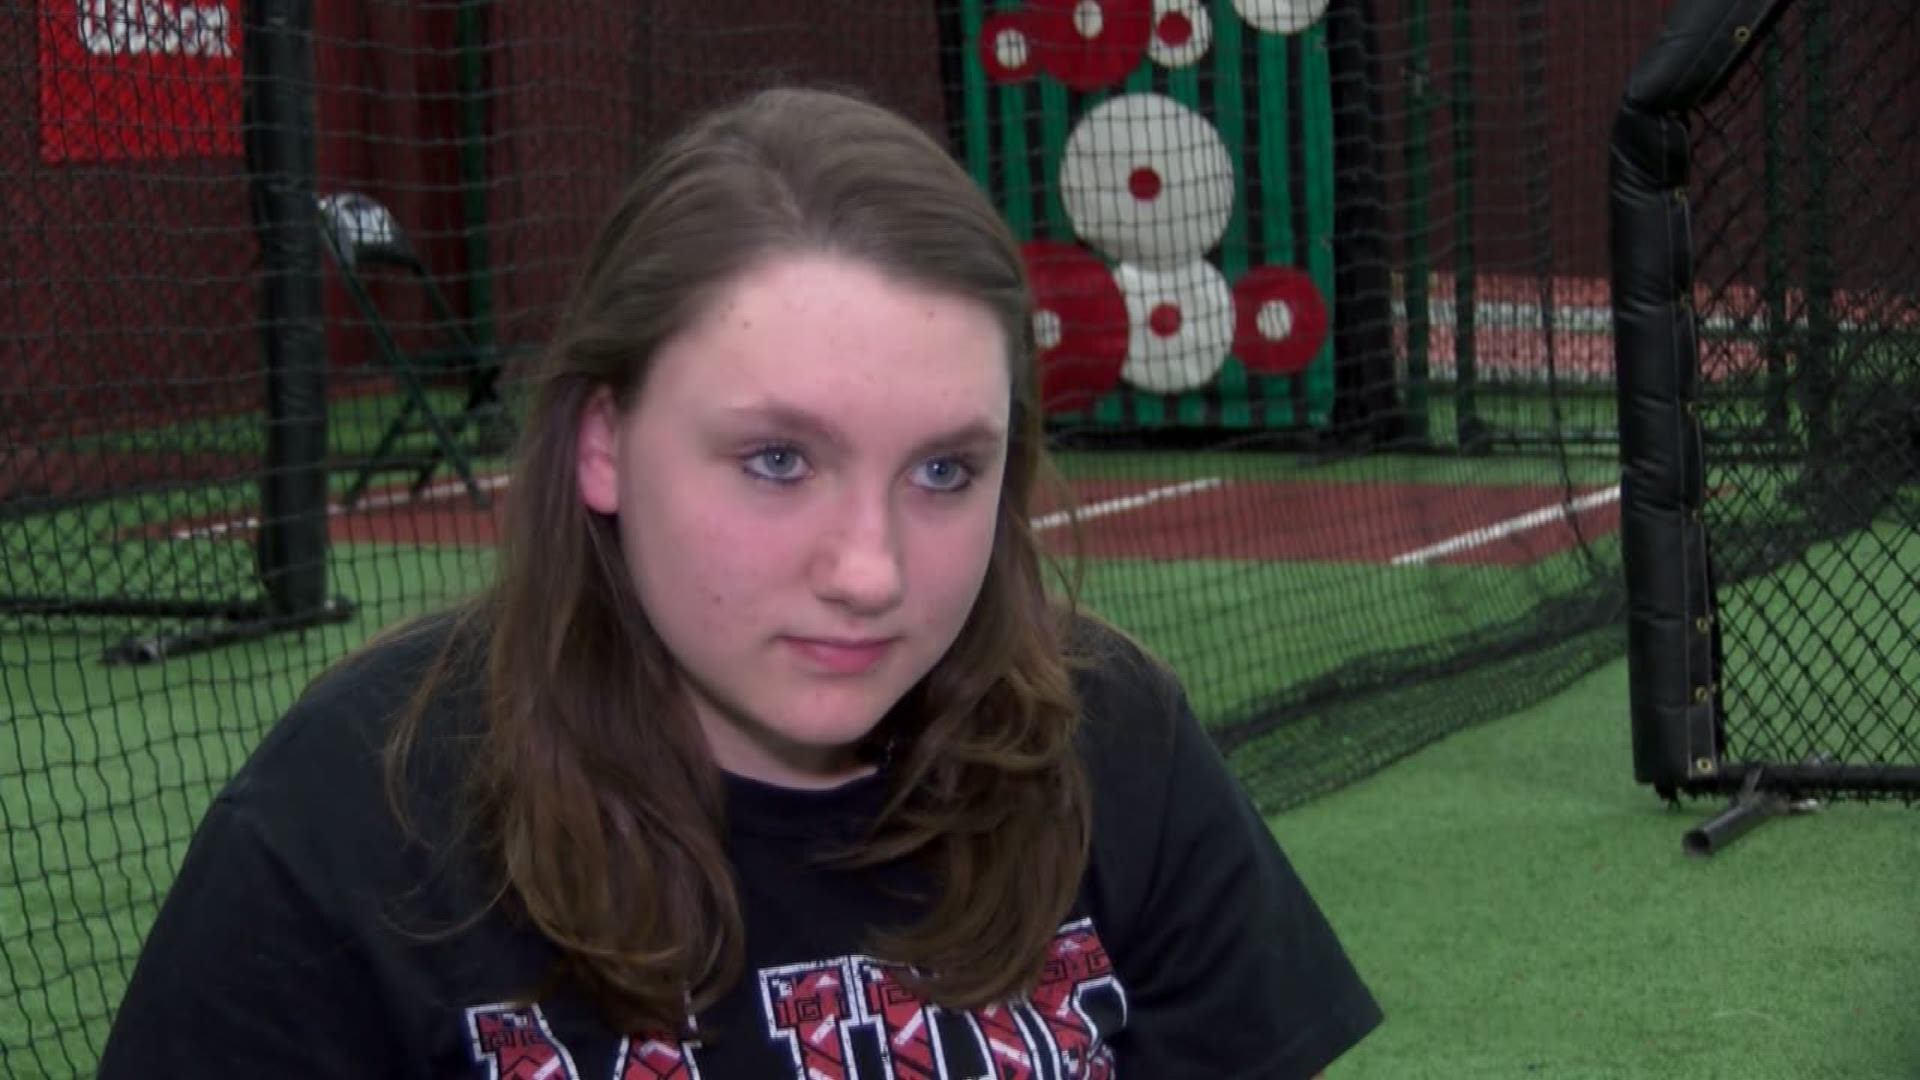 An East Texas teenager in foster care has had a lot of disappointment in her young life.